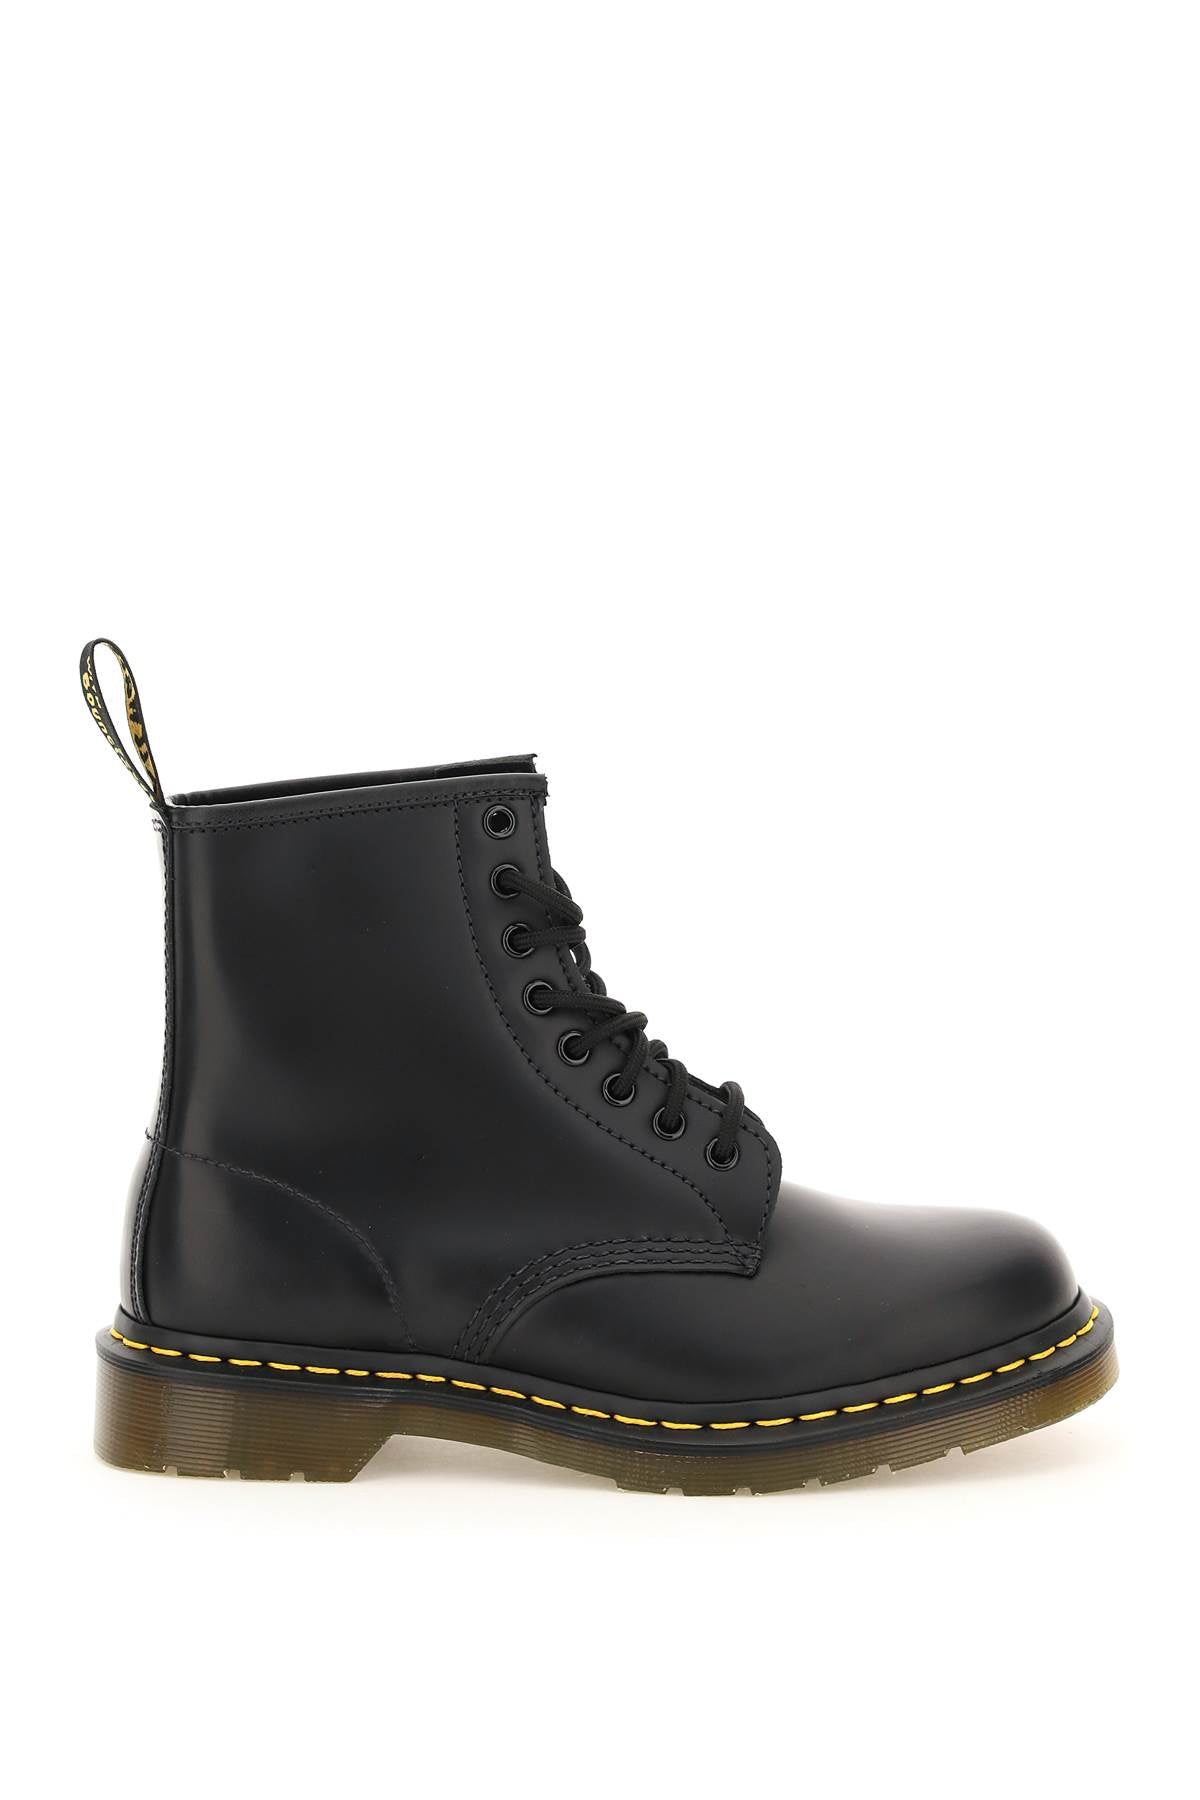 Dr.martens 1460 smooth leather combat boots-0